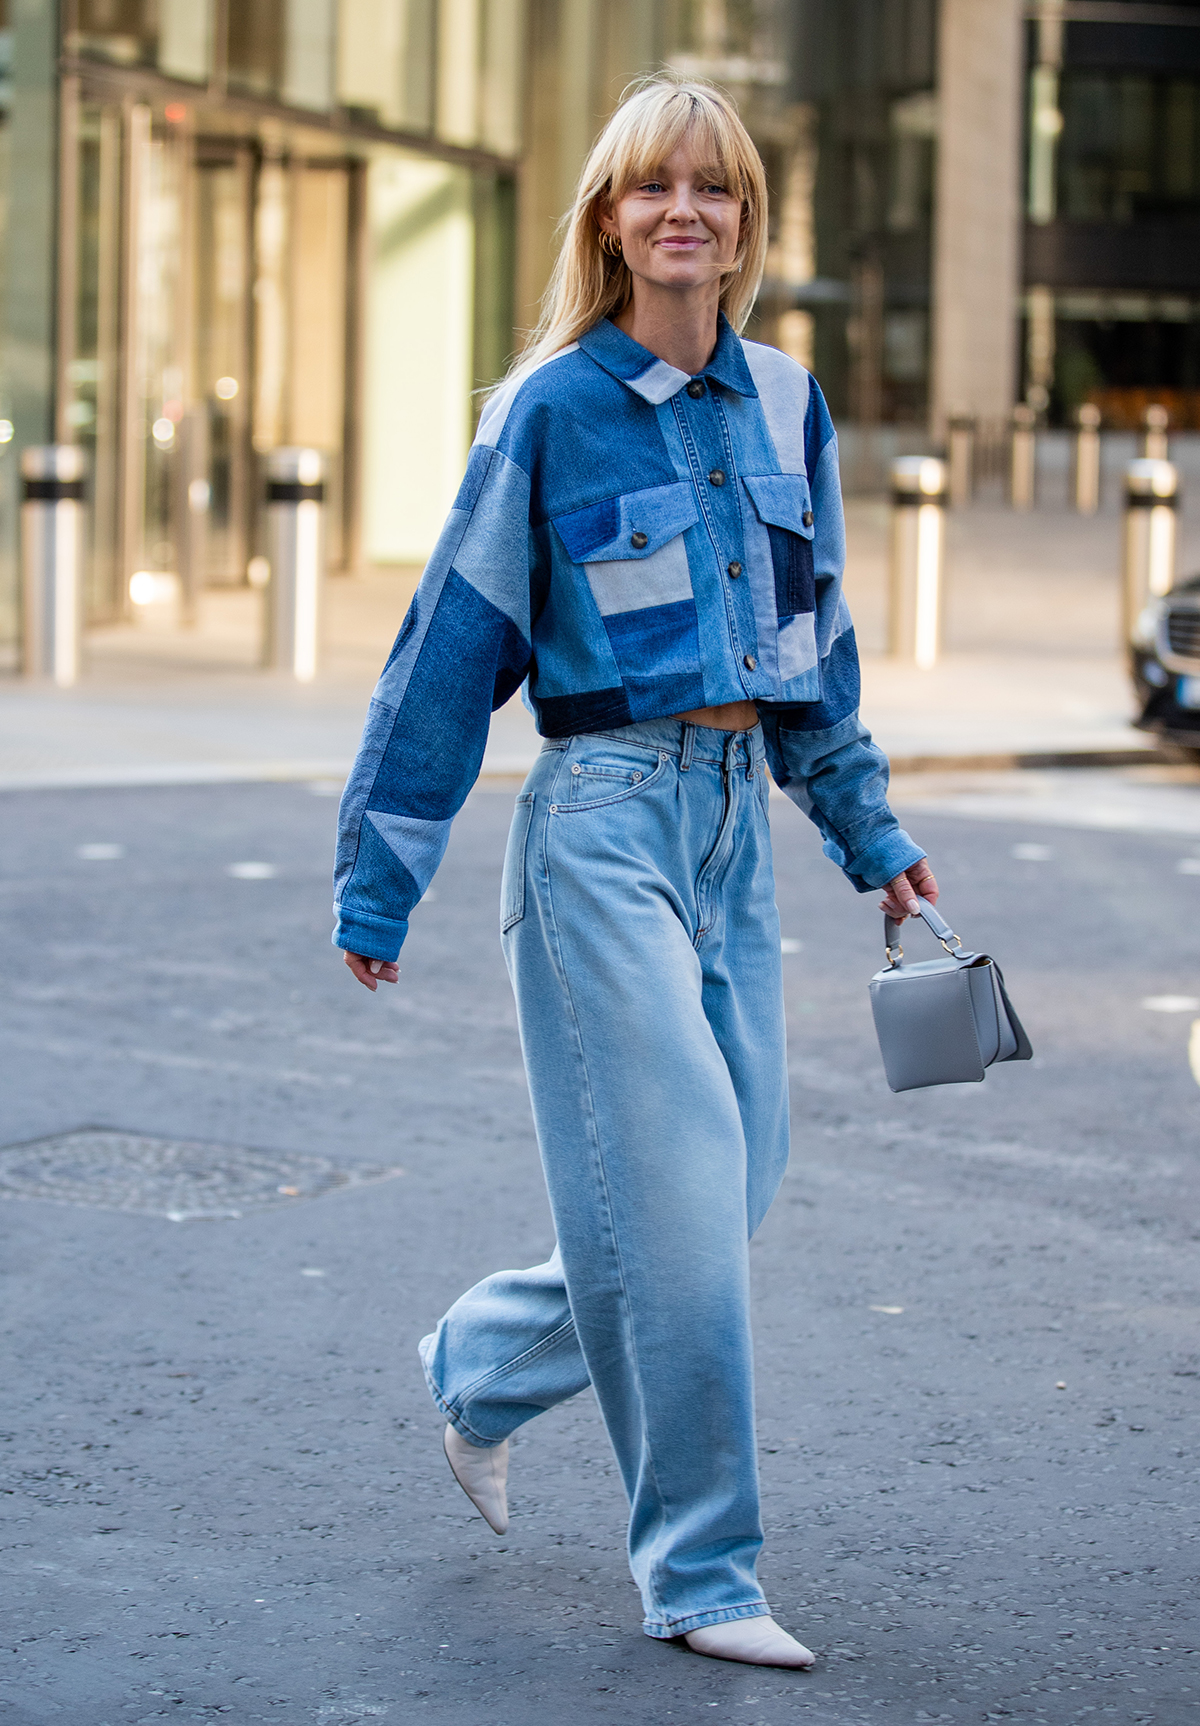 Patchwork Denim Is the Trend Huge Designers Are Revisiting Who What Wear